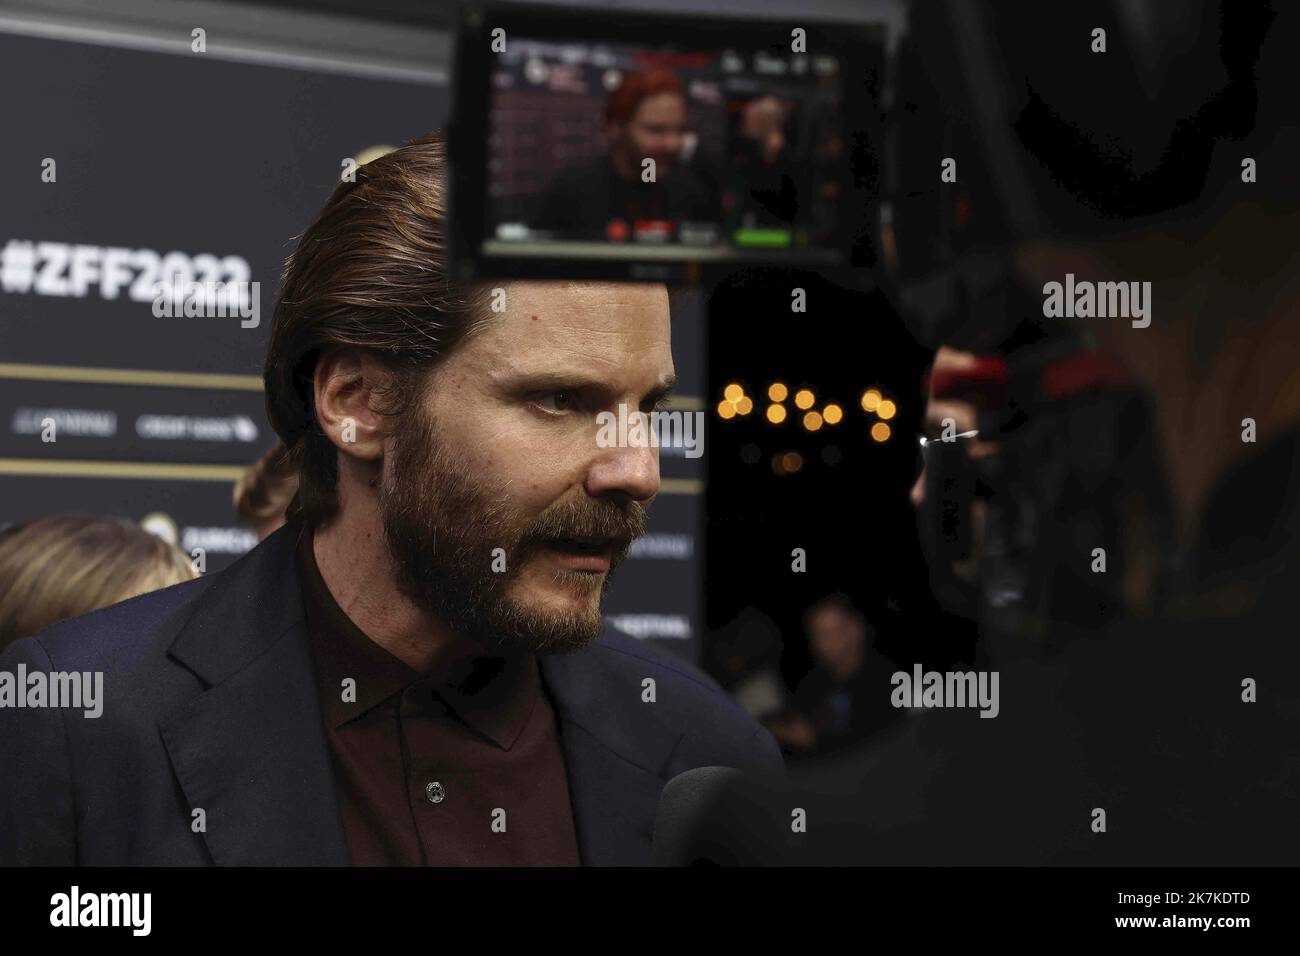 ©Francois Glories/MAXPPP - 23/09/2022 German-Spanish actor Daniel Brühl on the Green Carpet for the screening of the Netflix film 'All Quiet On The Western Front' at Zurich Film Festival in Switzerland. September 23 2022. Stock Photo